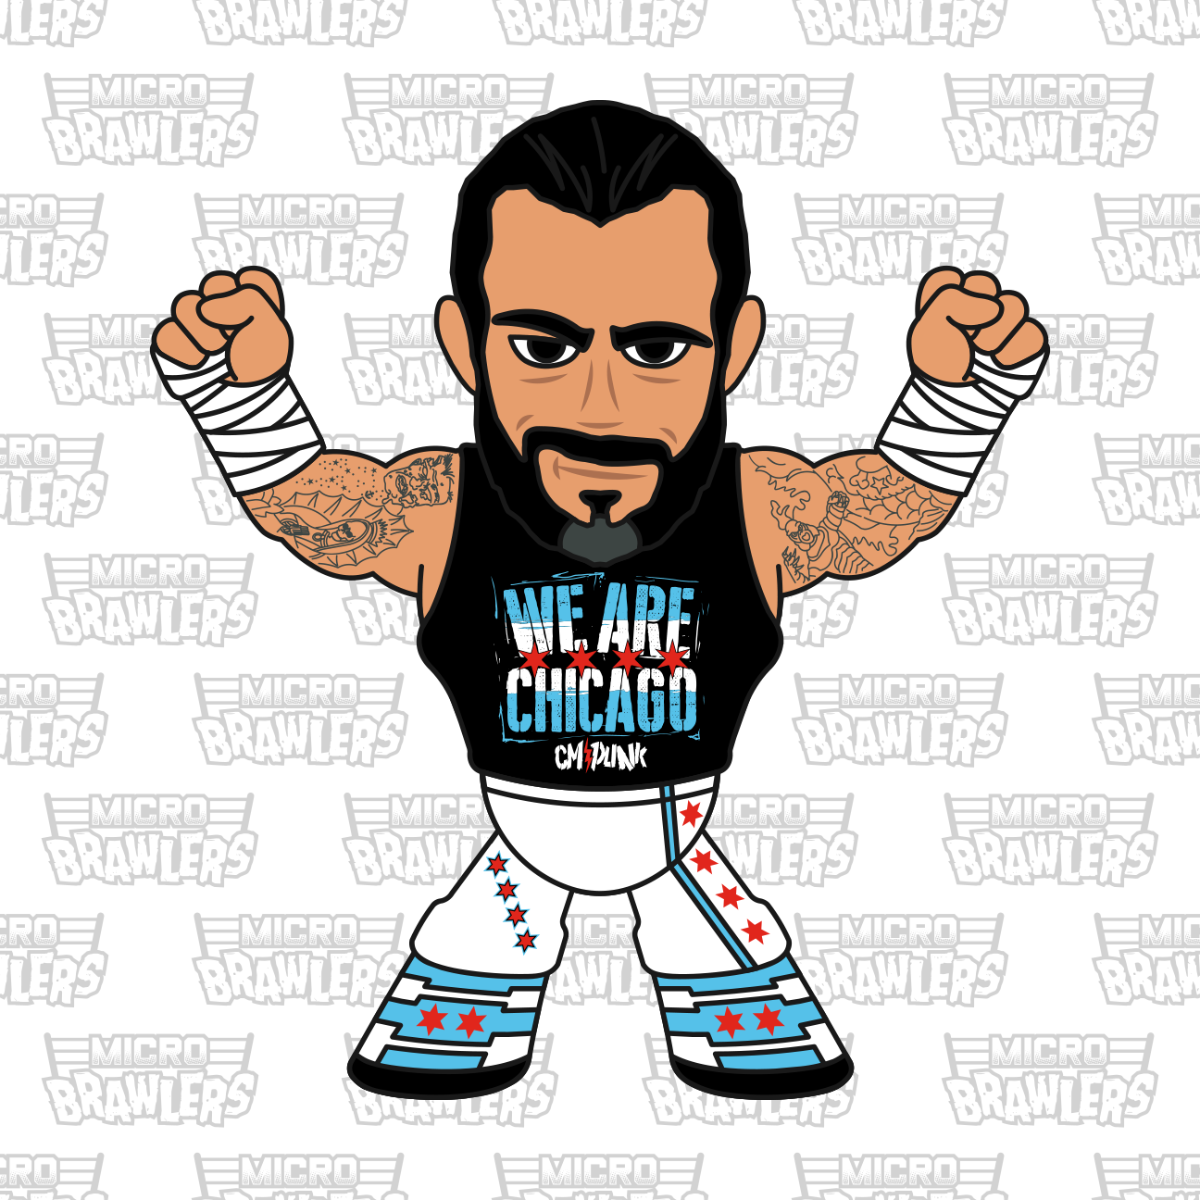 2023 AEW Pro Wrestling Tees Micro Brawlers Limited Edition CM Punk [Chicago Edition]